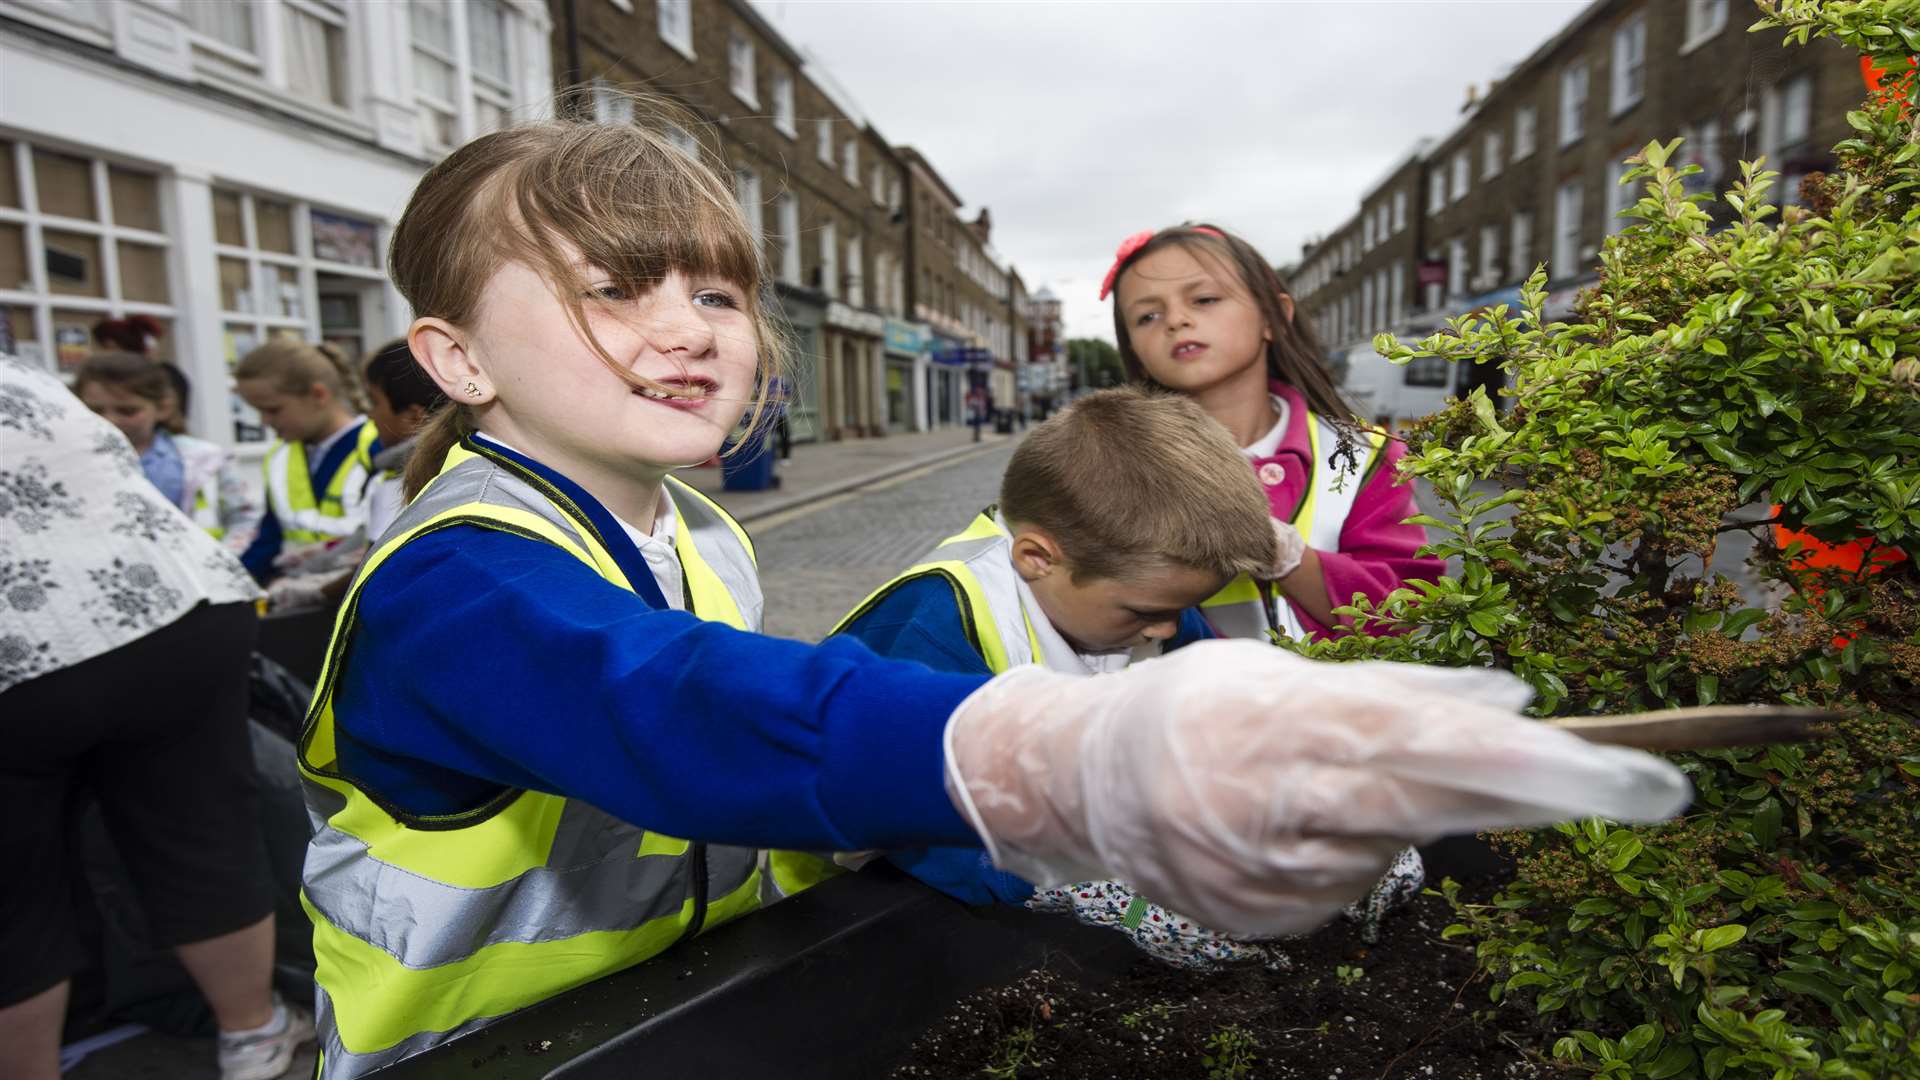 Youngsters planting flowers in the planters around the clock tower and Broadway, Sheerness